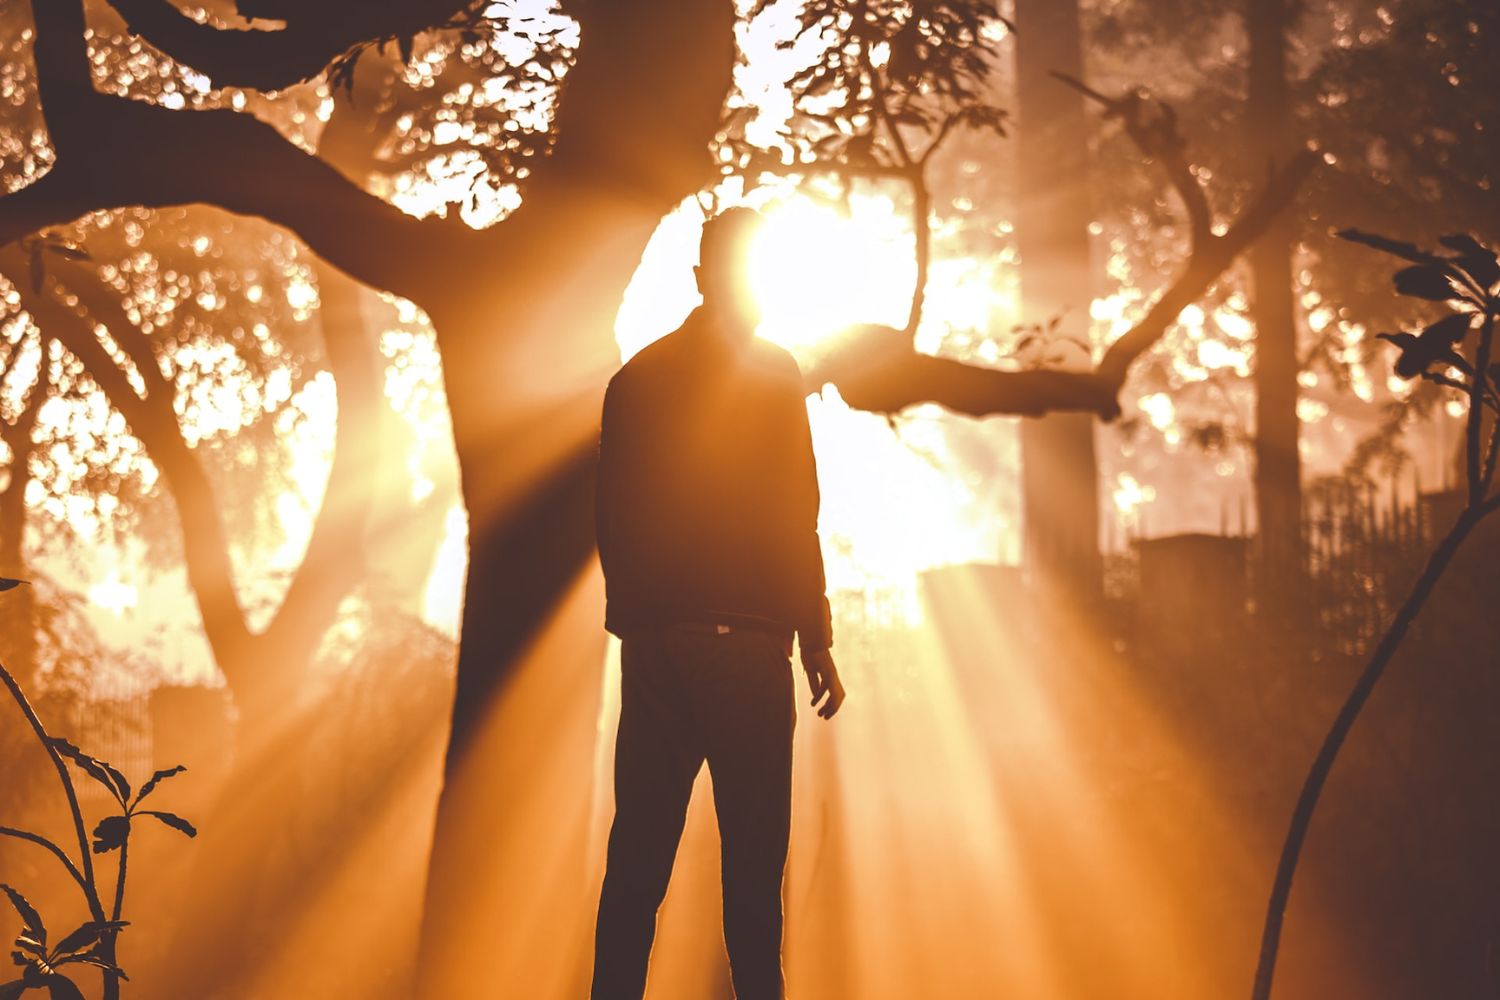 man standing in the forest and lighting front  by Dewang Gupta on Unsplash